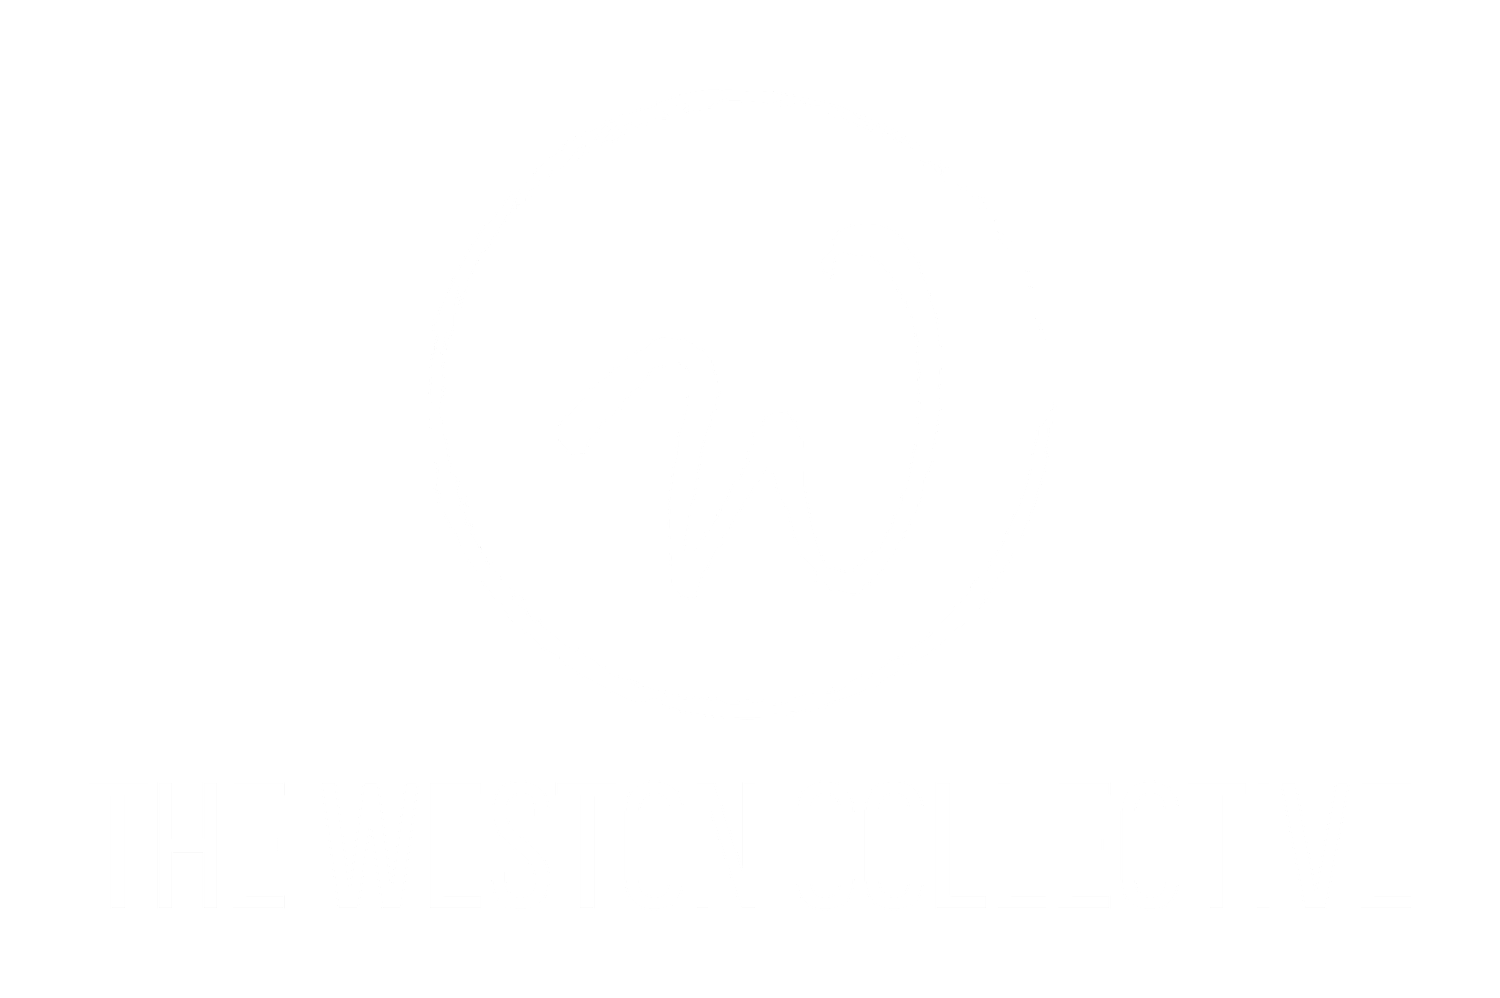 The Weston Collective